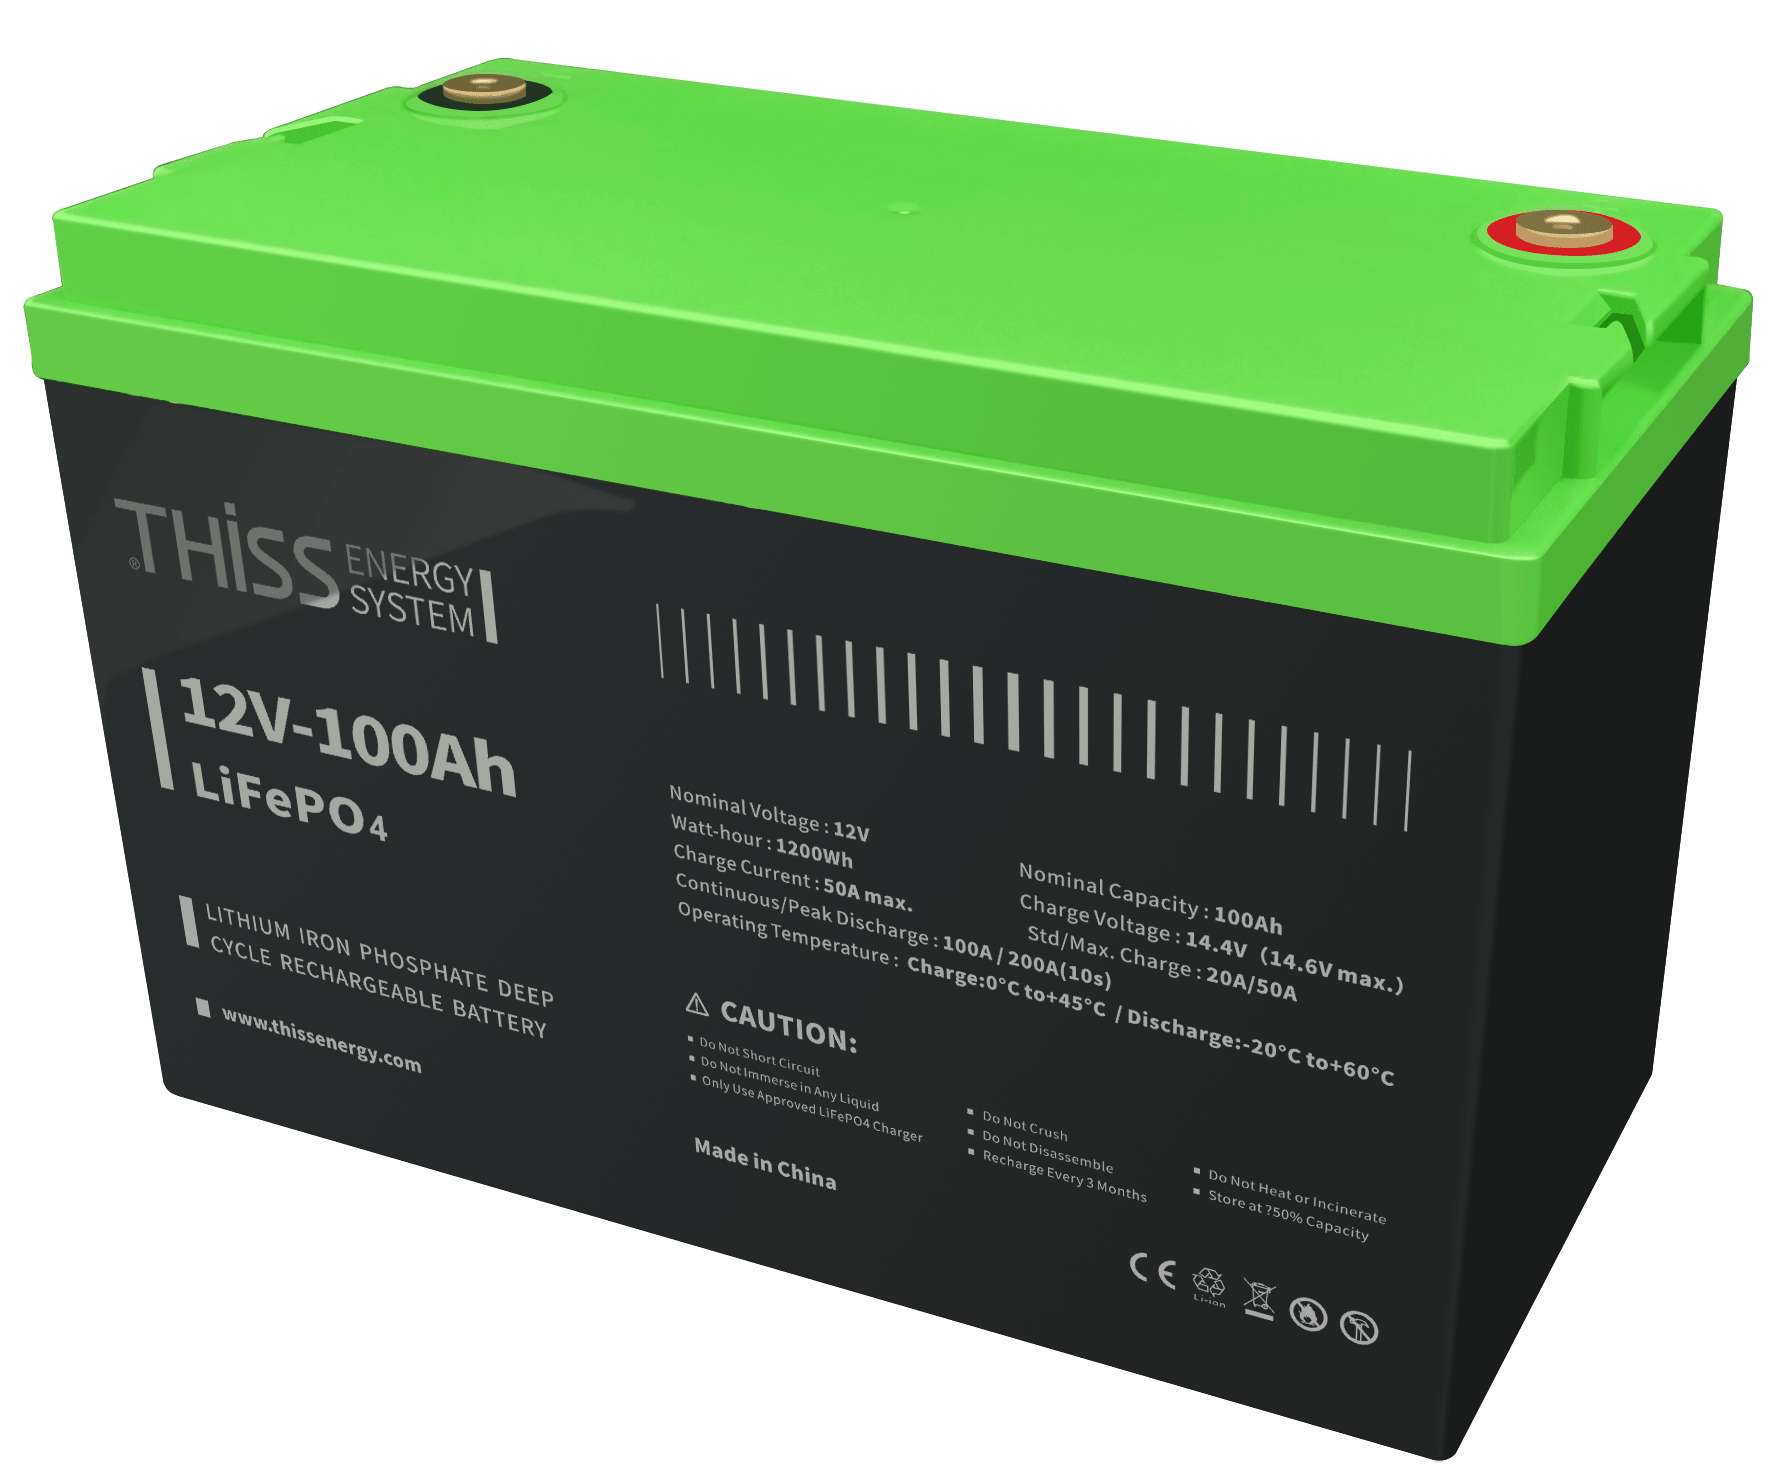 12V 100Ah LiFePO4 Battery, Built-in BMS, 4000+ Deep Cycle Rechargeable Battery, Maintenance Free Home Energy Storage And Off Grid Application Battery